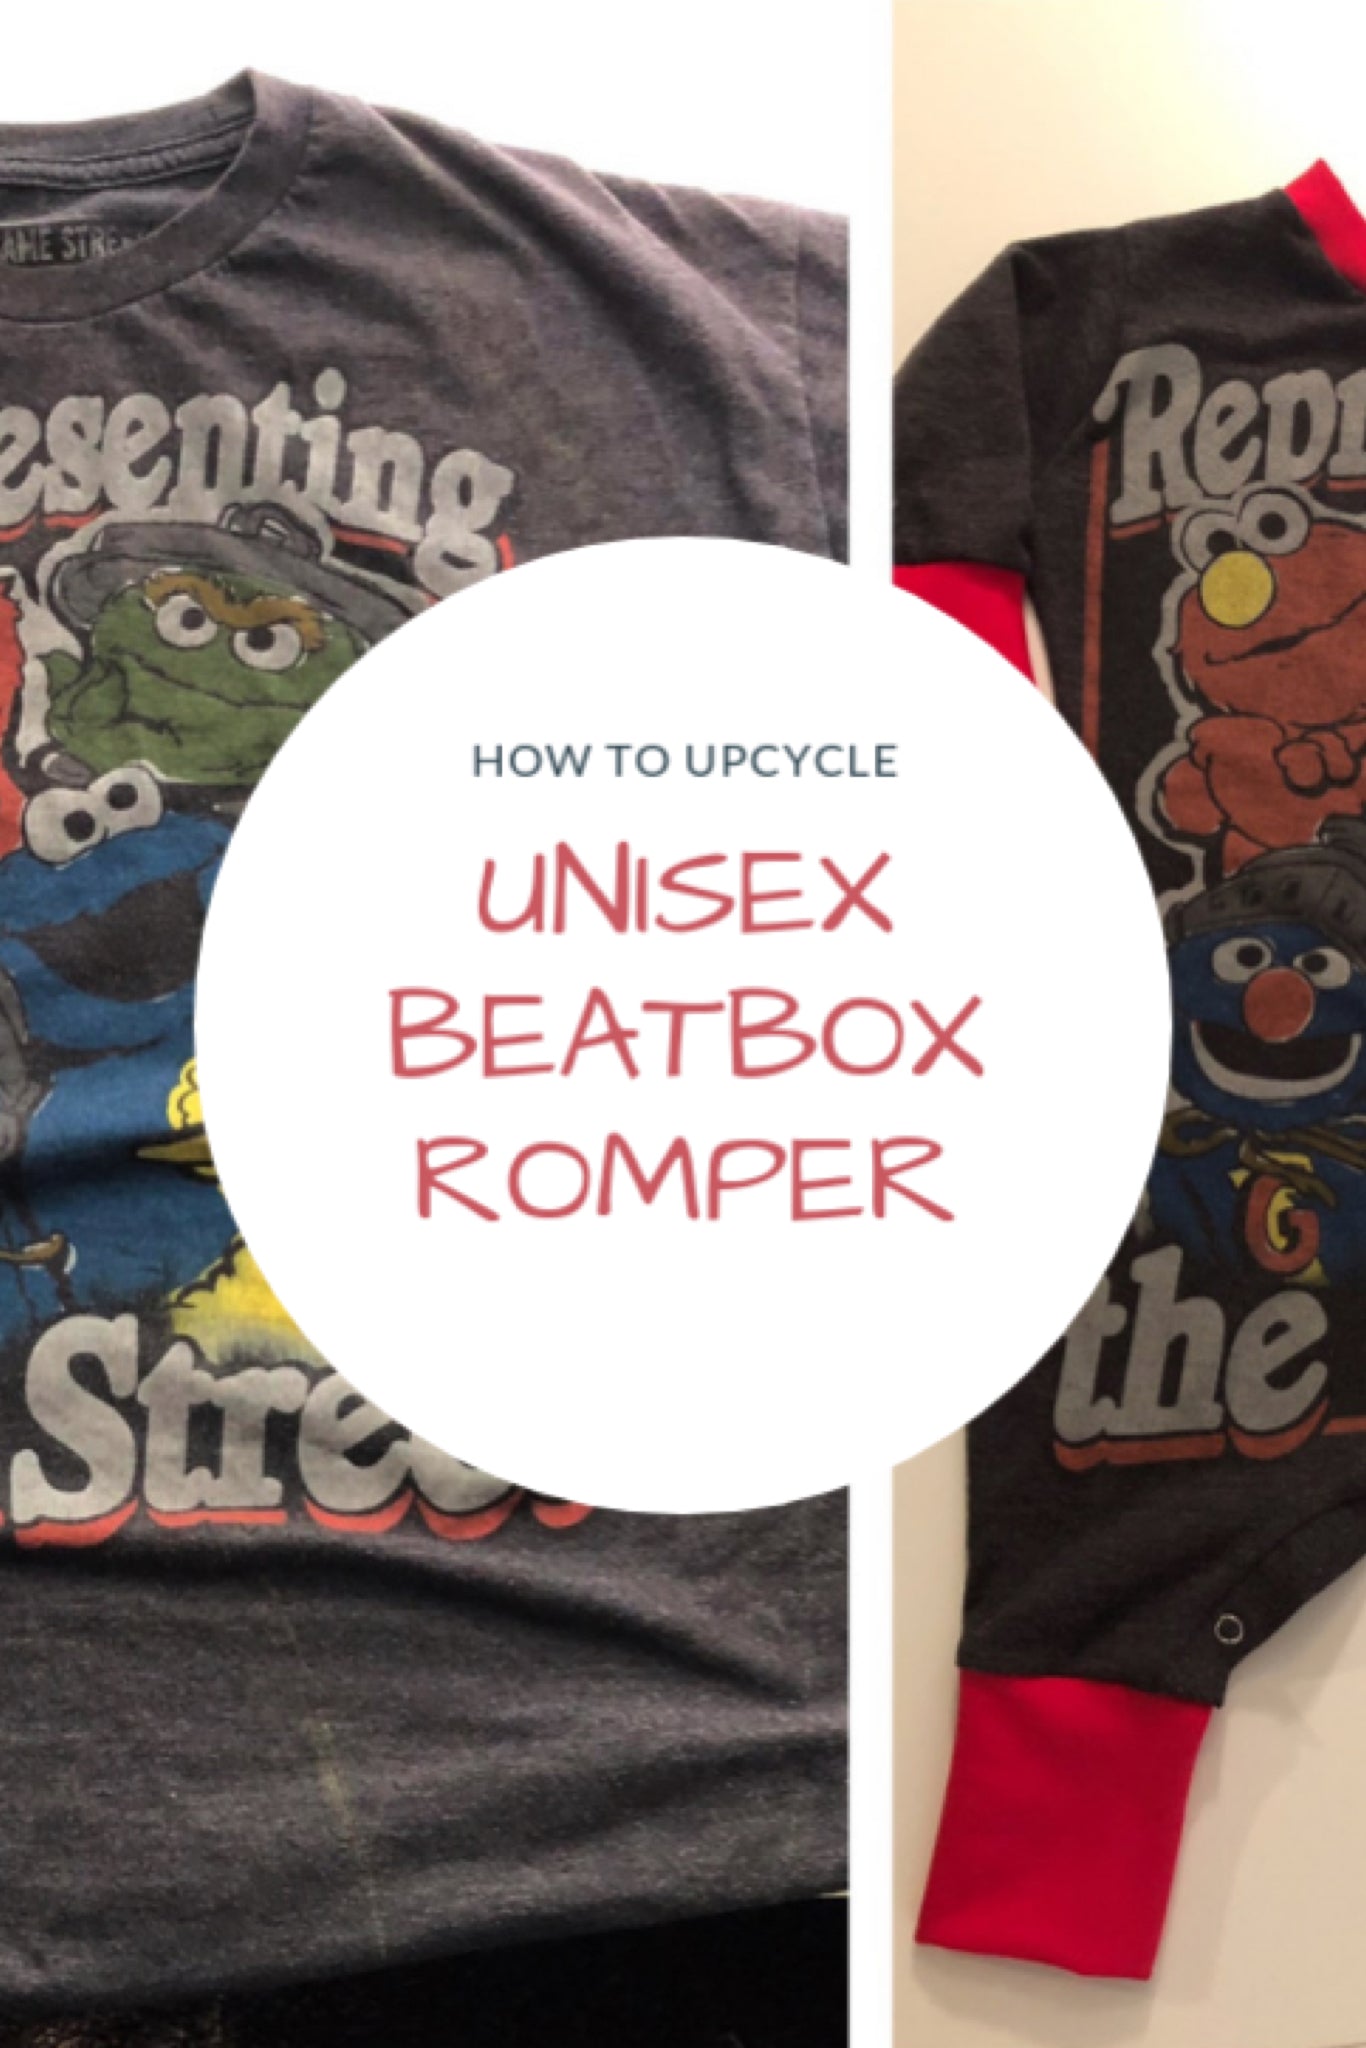 How to upcycle an Unisex Beatbox Romper